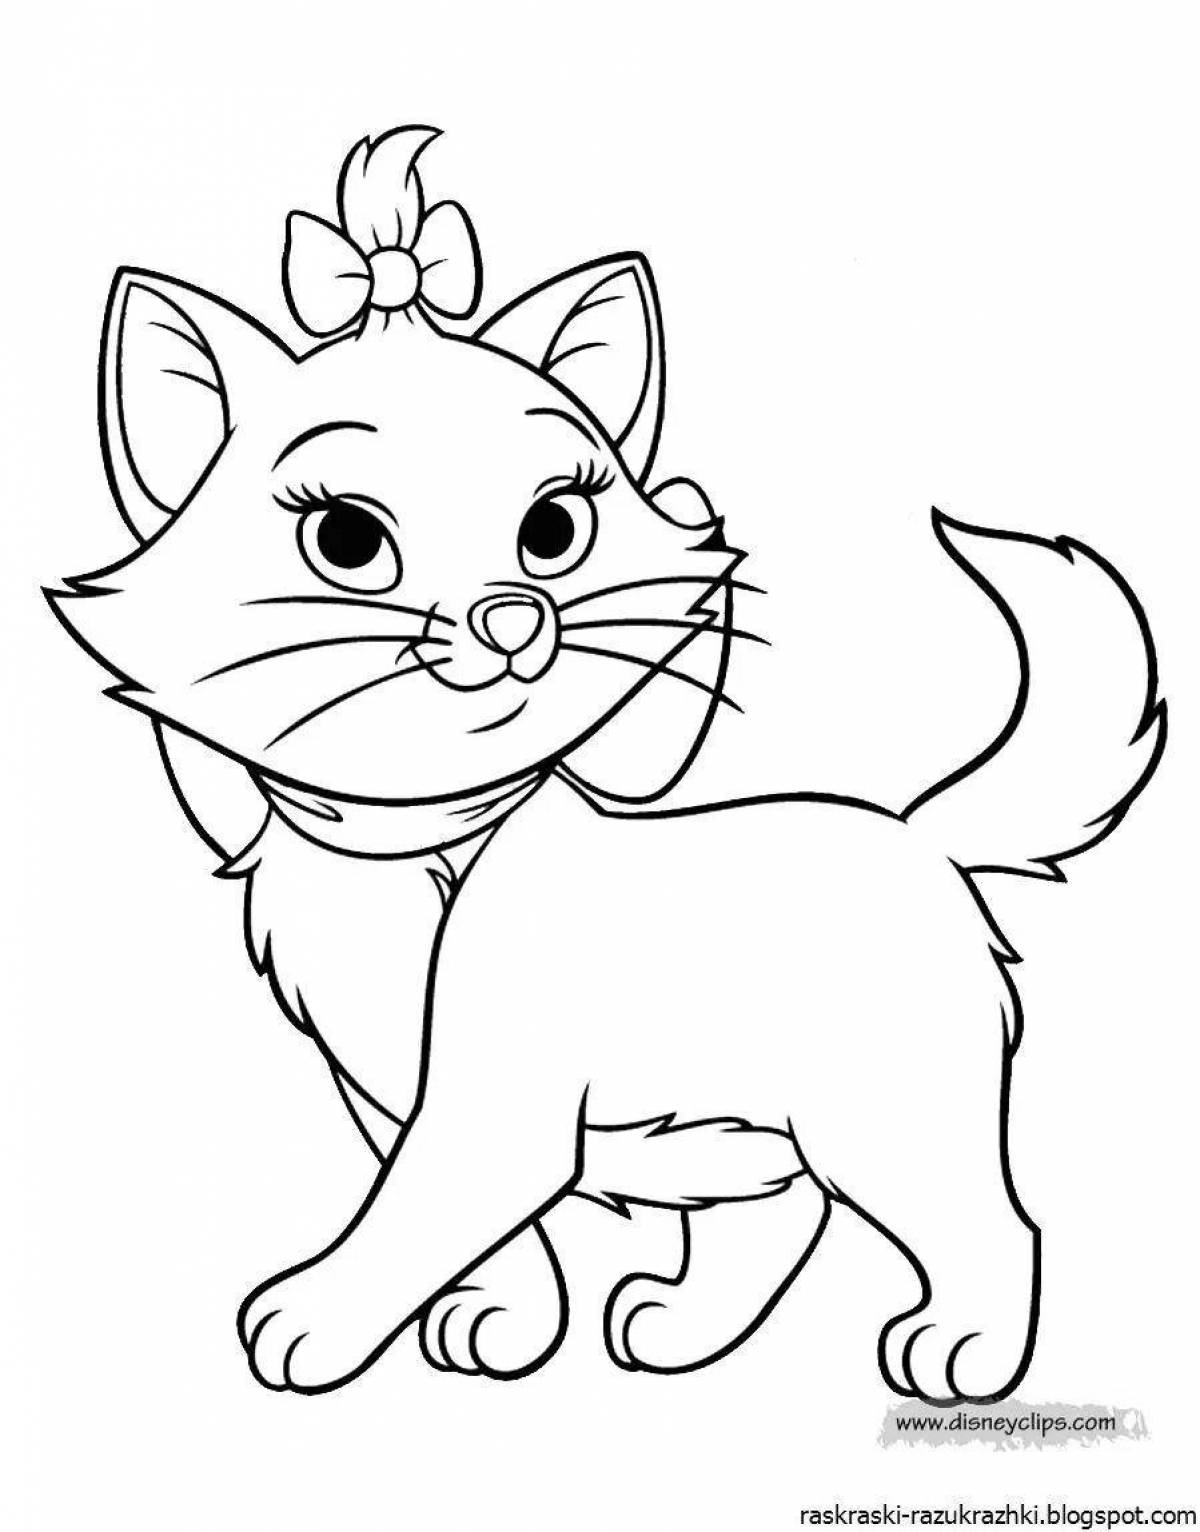 Cute kitty coloring book for 5-6 year olds